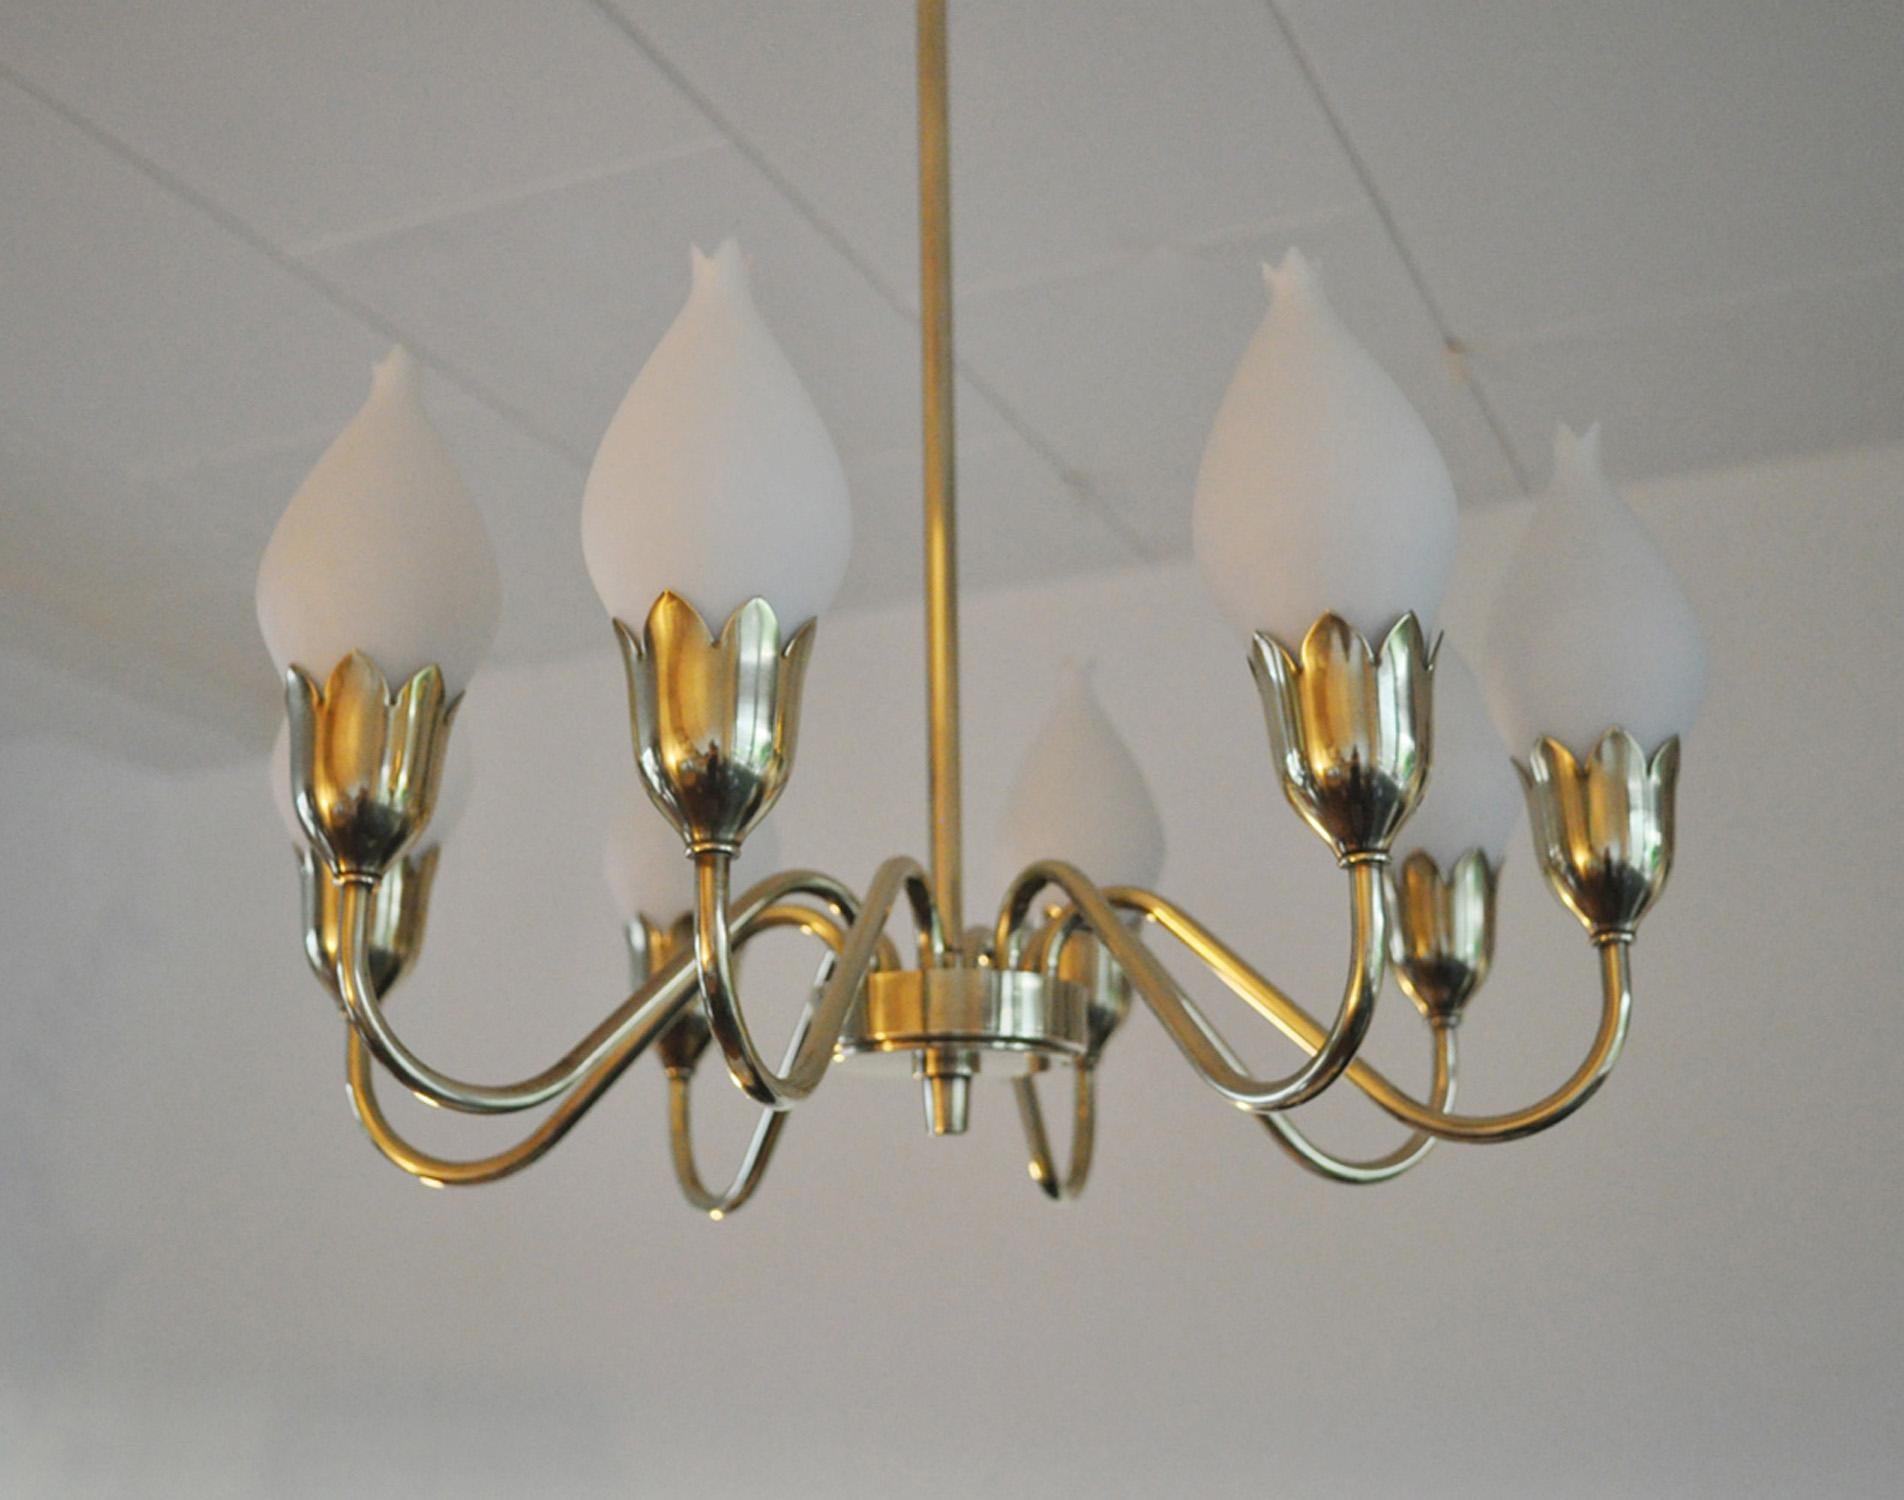 Tulip chandelier in brass and glass designed by Ansgar Fog & Erik Mørup
Produced by Fog & Mørup in Denmark.
Excellent vintage condition with small signs of usage. 
2 available.

 